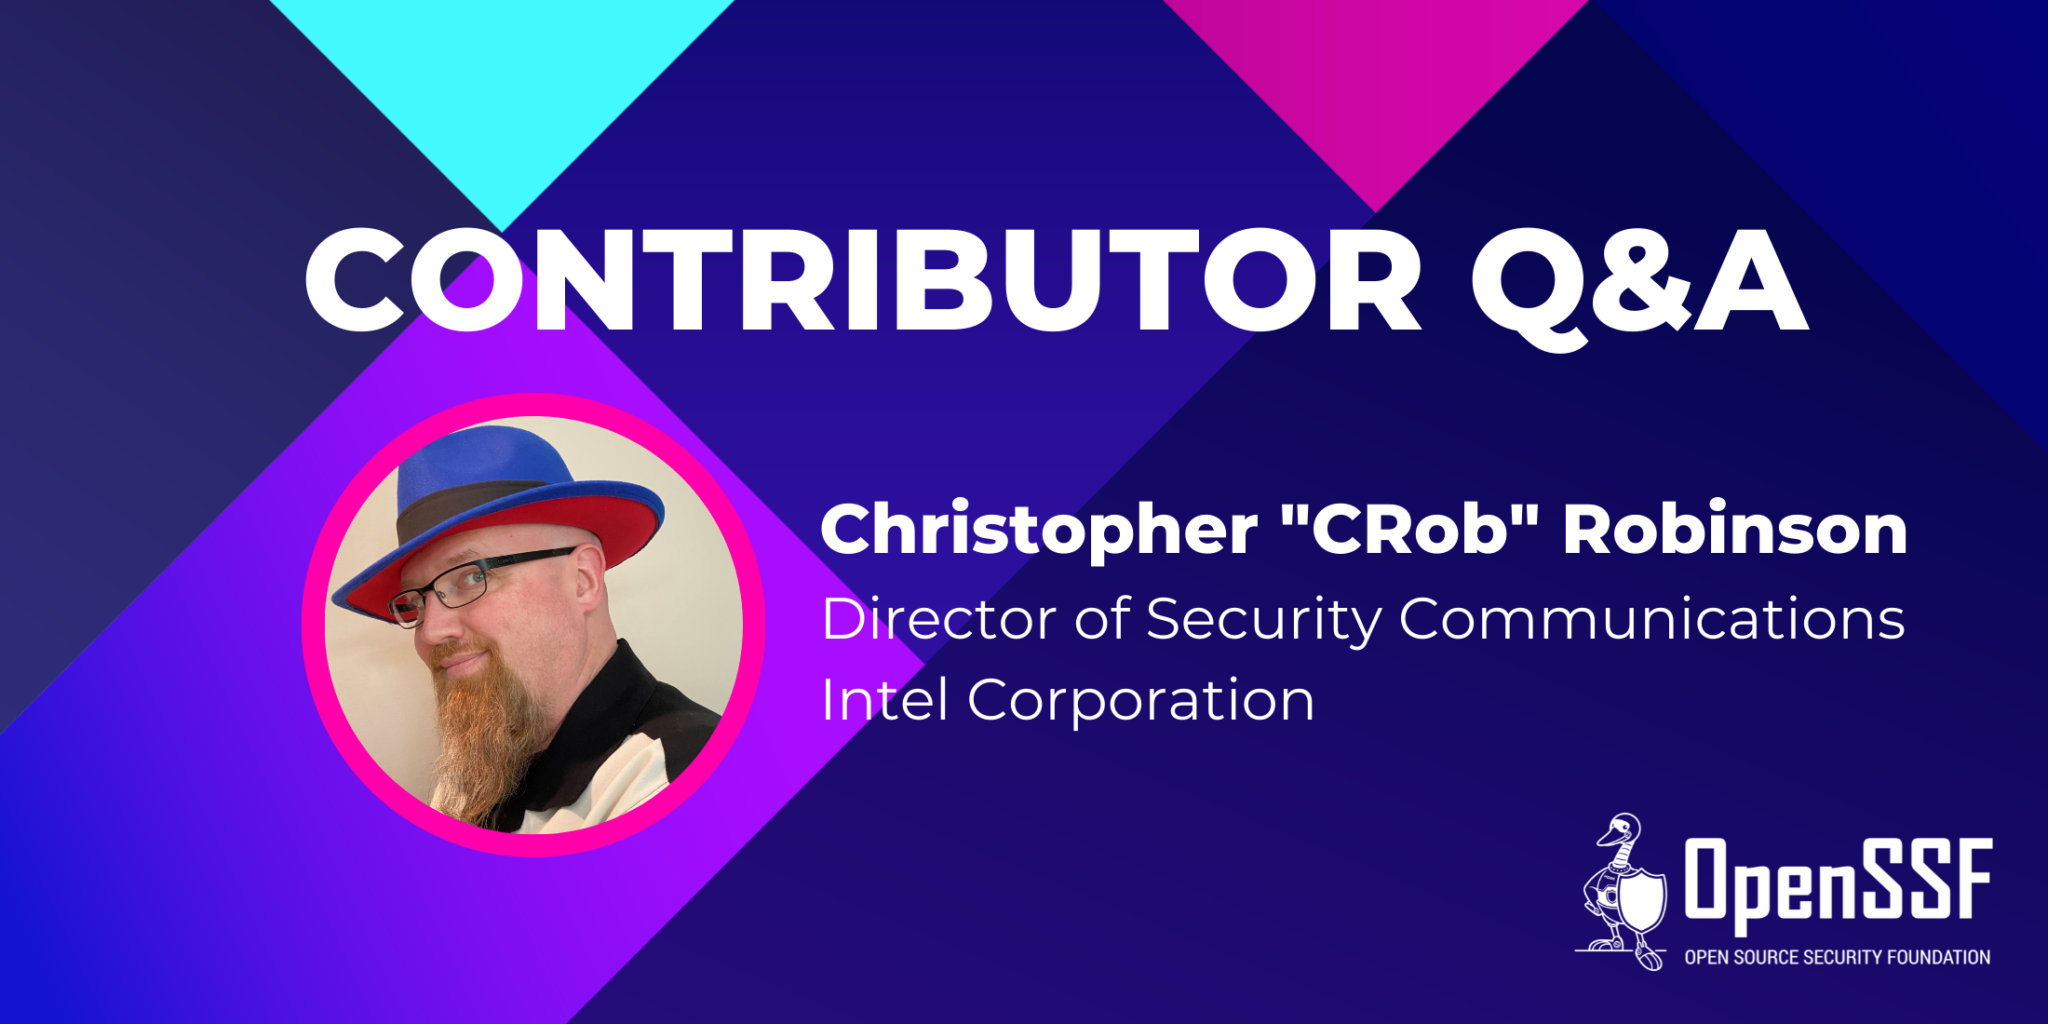 Contributor Q&A with Christopher "CRob" Robinson, Director of Security Communications, Intel Corporation